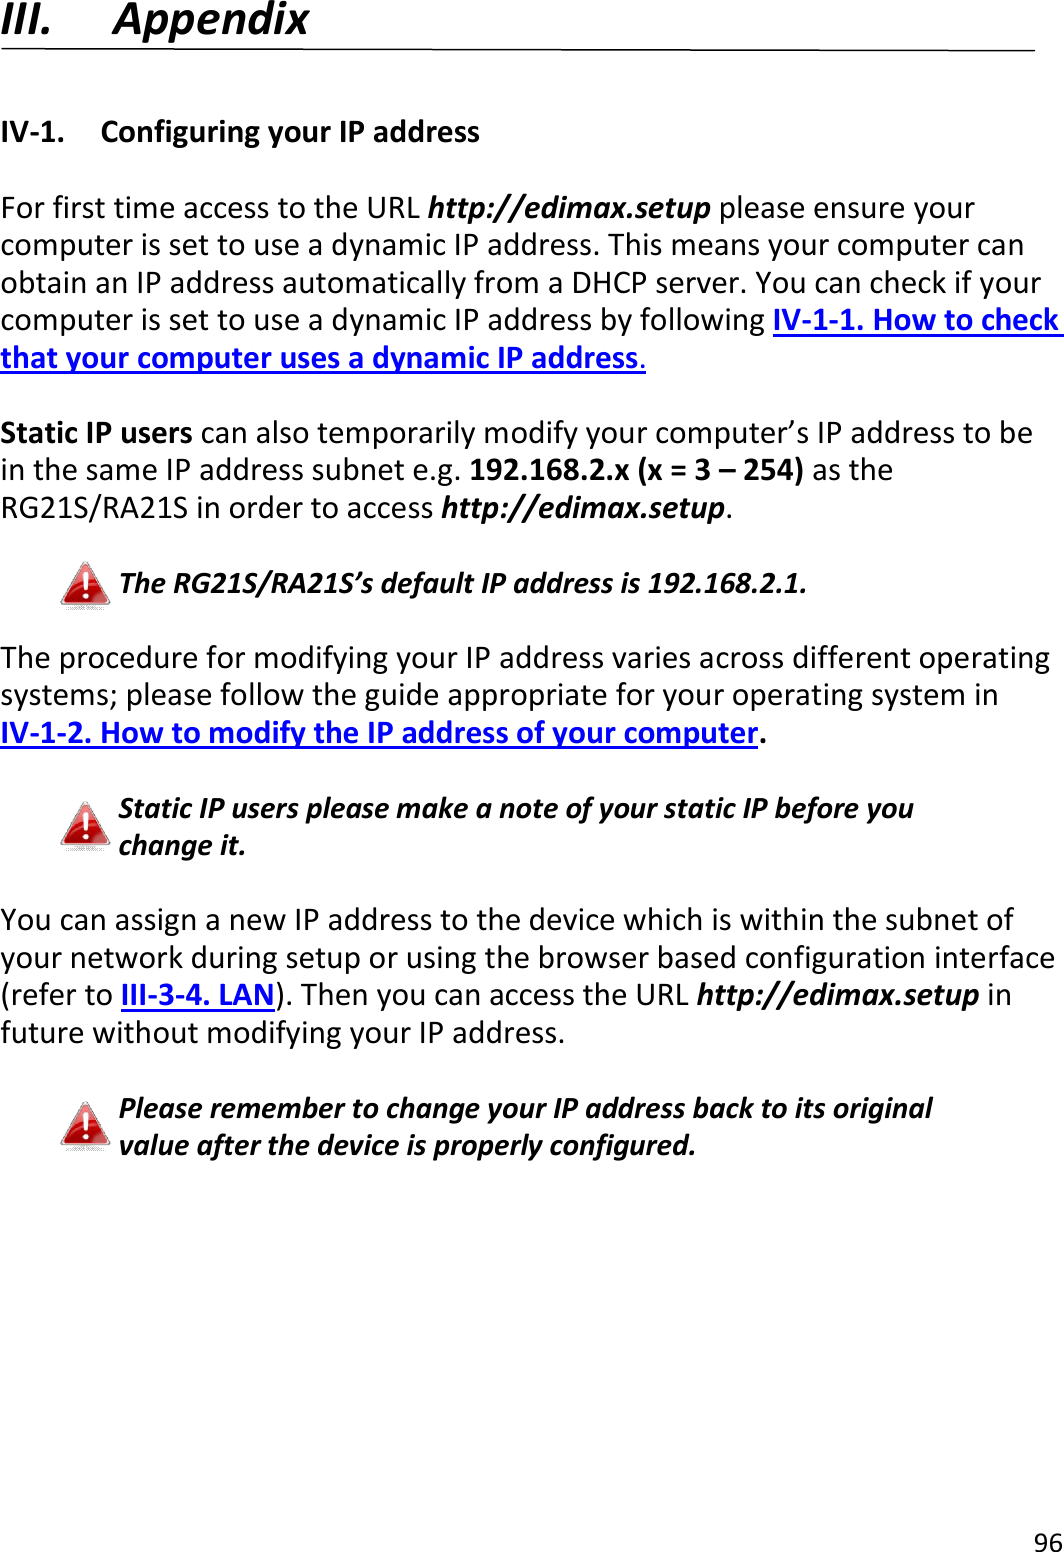 96  III. Appendix  IV-1.  Configuring your IP address  For first time access to the URL http://edimax.setup please ensure your computer is set to use a dynamic IP address. This means your computer can obtain an IP address automatically from a DHCP server. You can check if your computer is set to use a dynamic IP address by following IV-1-1. How to check that your computer uses a dynamic IP address.  Static IP users can also temporarily modify your computer’s IP address to be in the same IP address subnet e.g. 192.168.2.x (x = 3 – 254) as the RG21S/RA21S in order to access http://edimax.setup.  The RG21S/RA21S’s default IP address is 192.168.2.1.  The procedure for modifying your IP address varies across different operating systems; please follow the guide appropriate for your operating system in IV-1-2. How to modify the IP address of your computer.  Static IP users please make a note of your static IP before you change it.  You can assign a new IP address to the device which is within the subnet of your network during setup or using the browser based configuration interface (refer to III-3-4. LAN). Then you can access the URL http://edimax.setup in future without modifying your IP address.  Please remember to change your IP address back to its original value after the device is properly configured.  